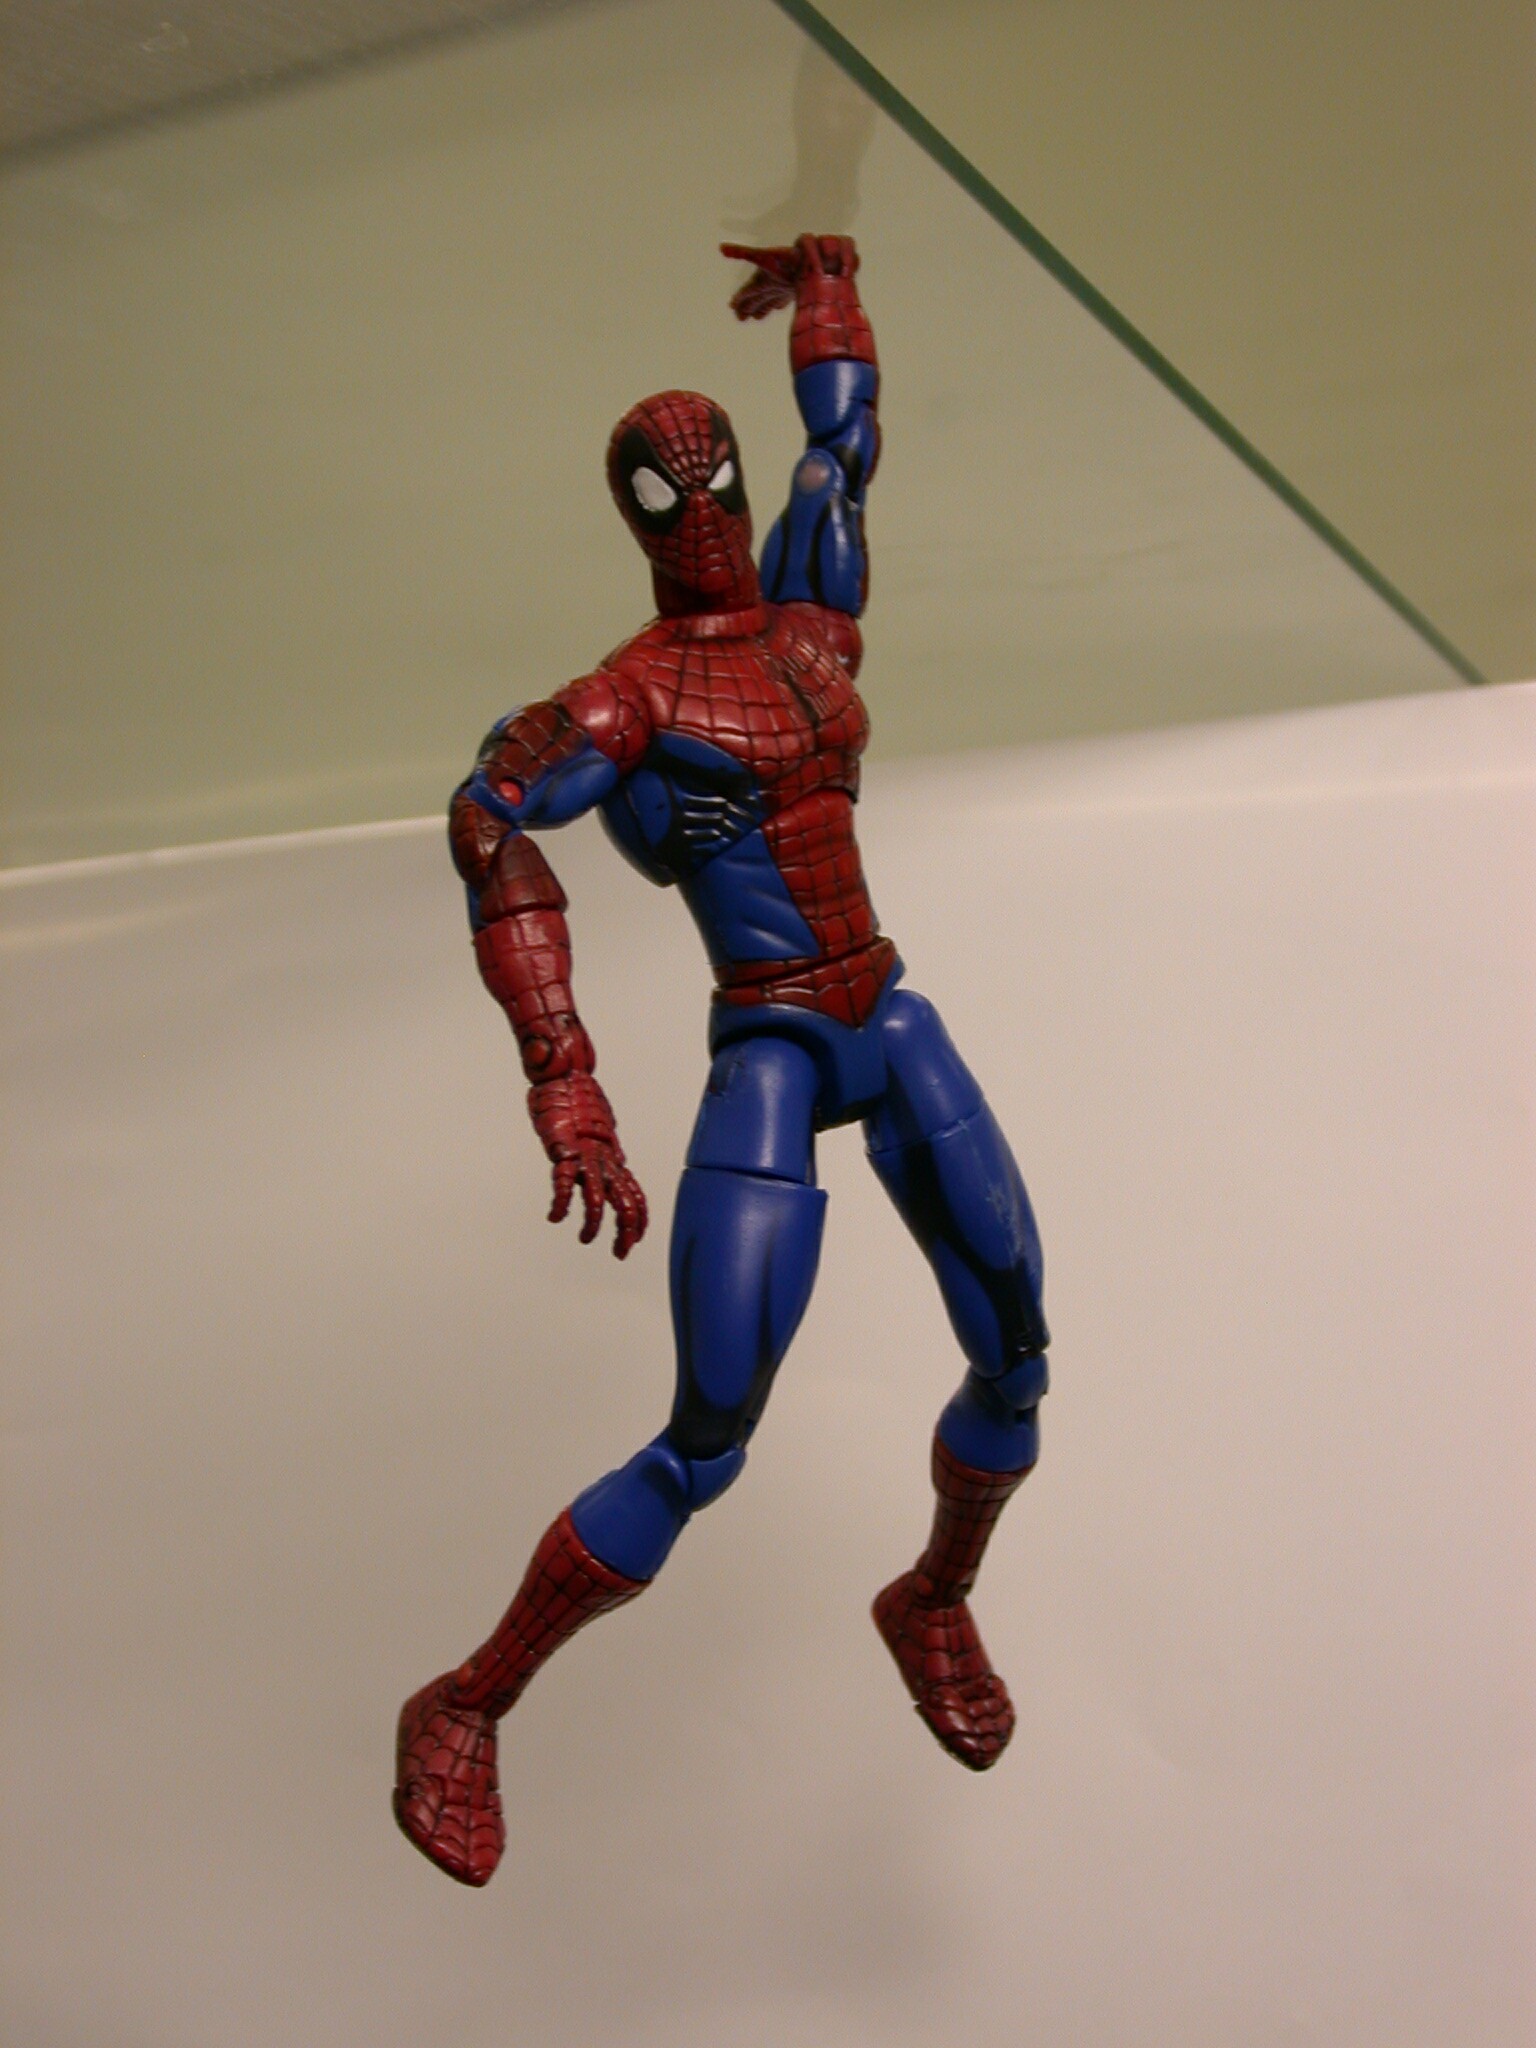 Spiderman toy hanging from a glass plate, attached using the tape with a contact area of approximately 0.5cm2 with a carry load of >100g. This toy has been attached to several surfaces before this photo was taken.